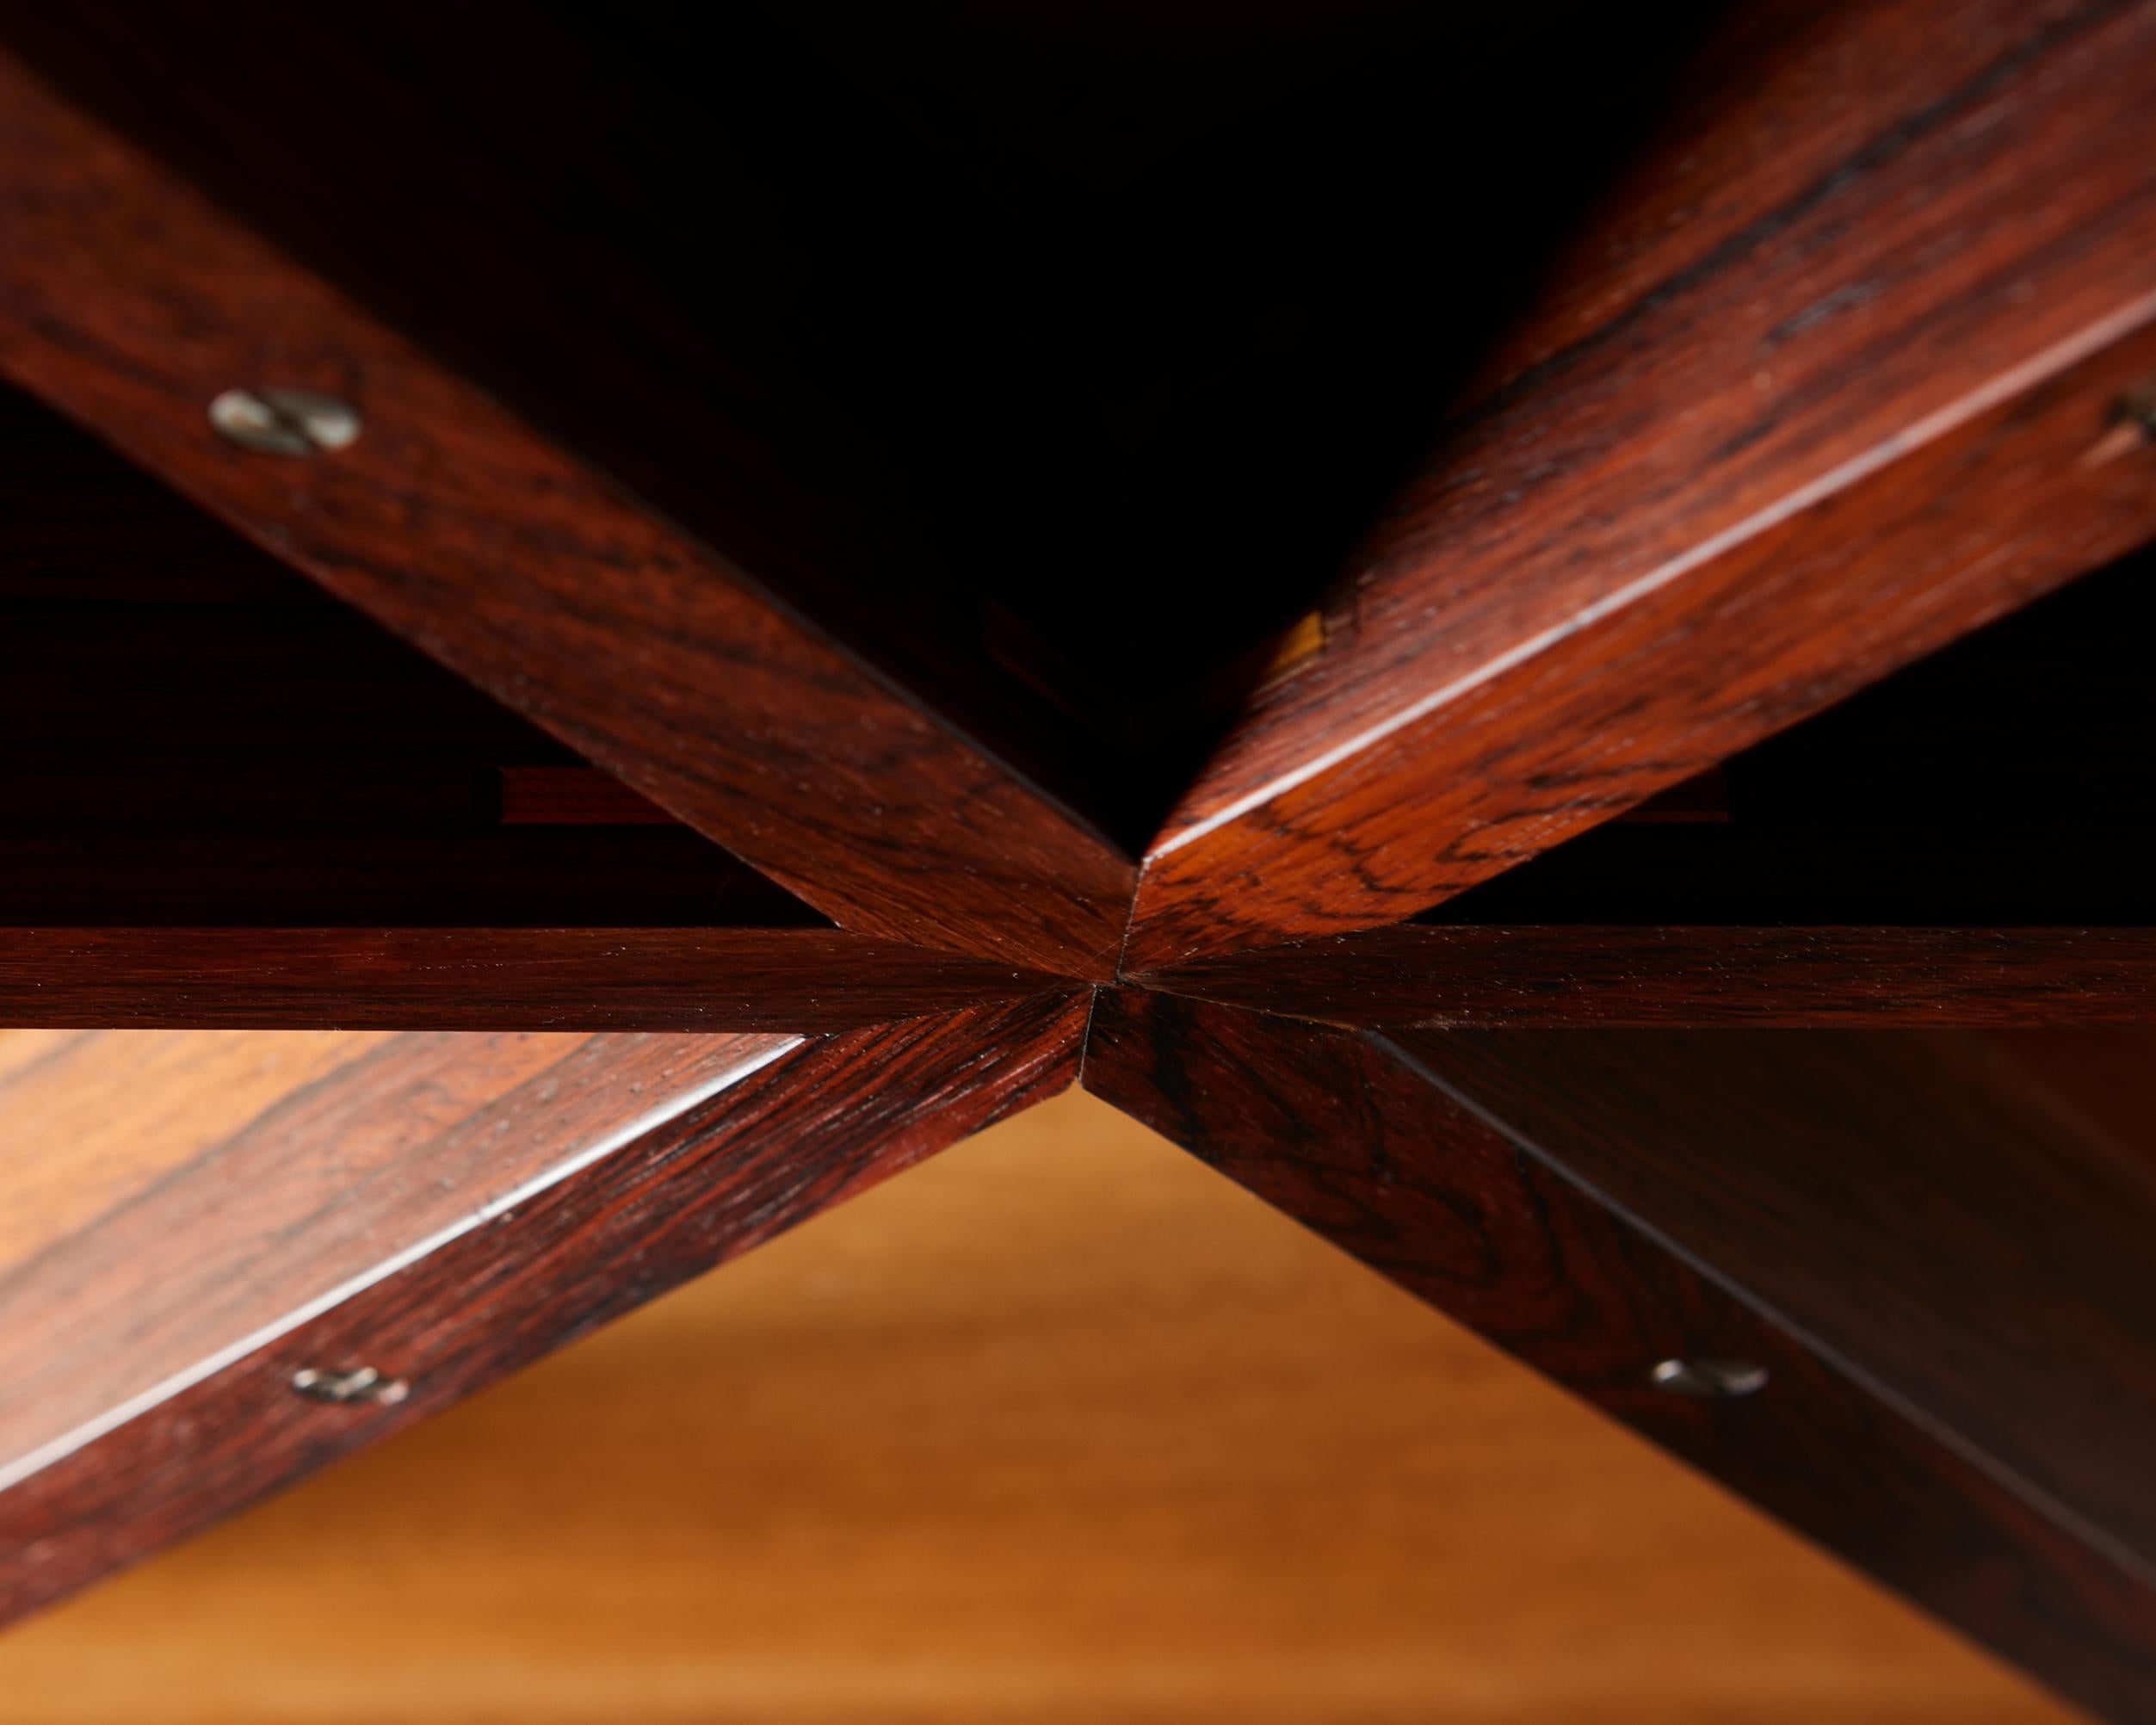 20th Century Occasional Table Designed by Frits Schlegel, Rosewood and Brass, Denmark, 1949 For Sale